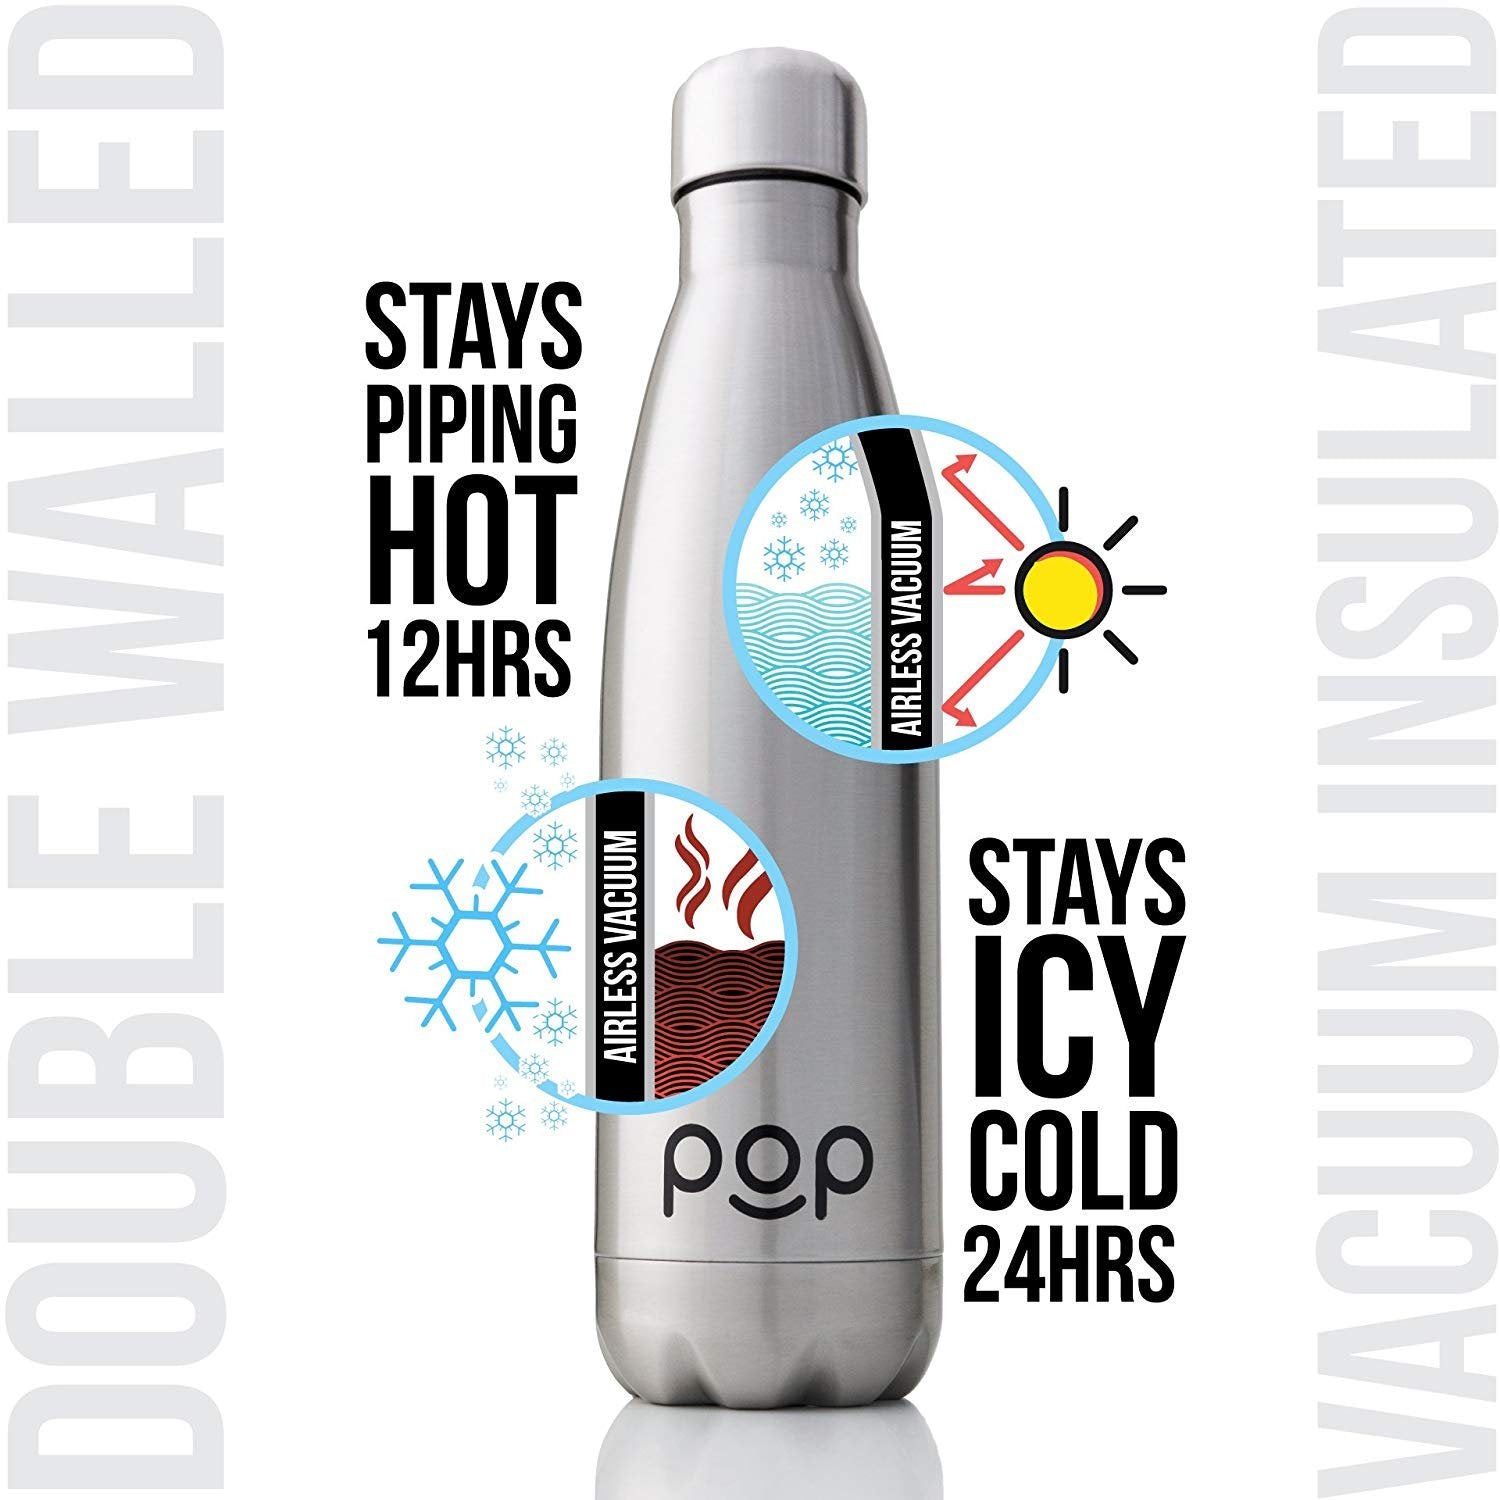 POP Design Stainless Steel Vacuum Insulated Water Bottle, Keeps Cold  24hrs. or Hot for 12hrs., Sweat & Leak-Proof, Narrow Mouth & BPA Free, 25 Oz (740ml)